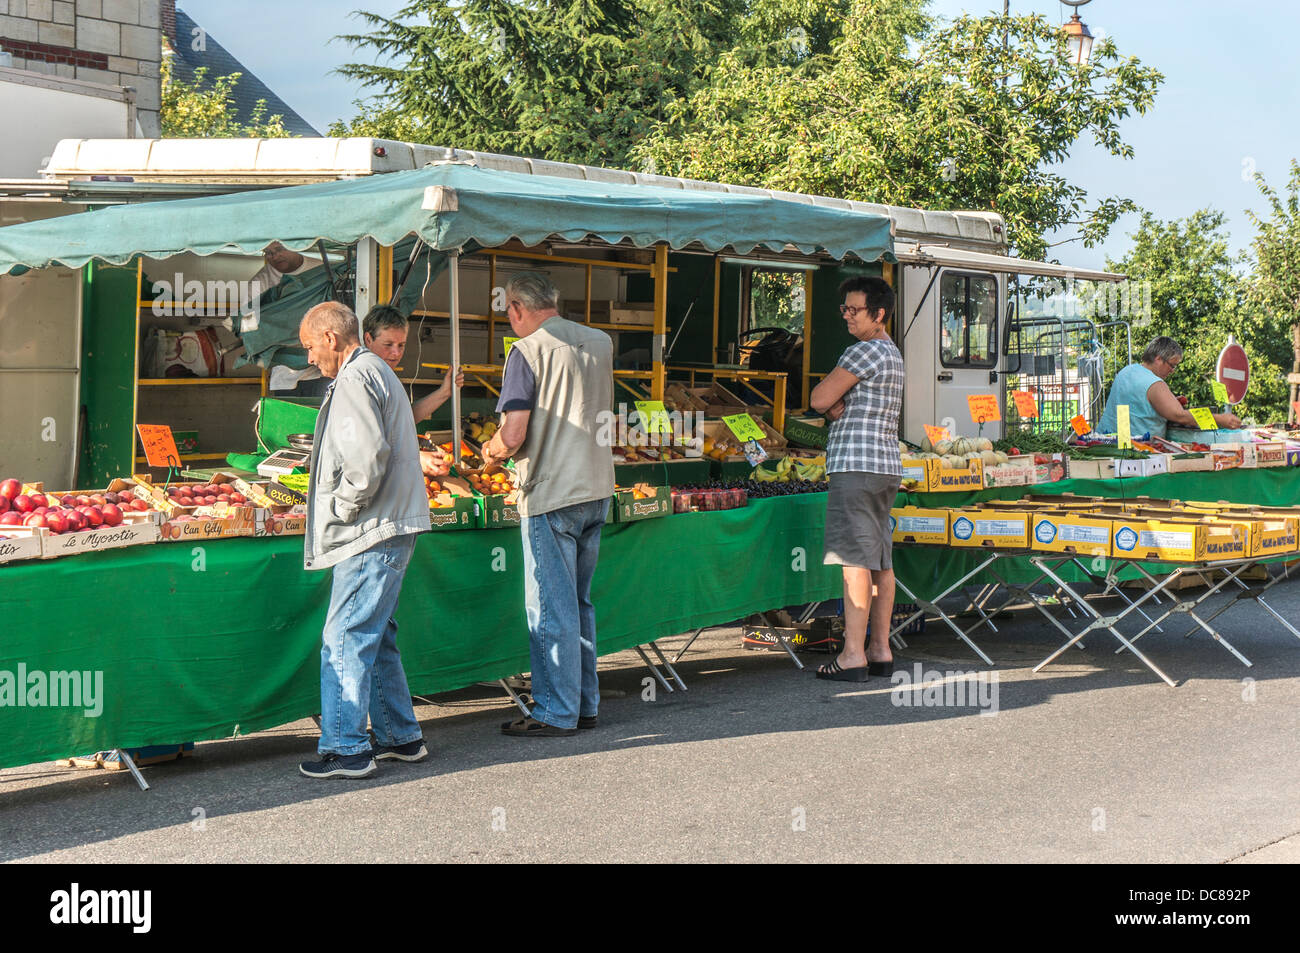 Outdoor fruit and vegetable market in the small town of La Mailleraye-sur-Seine, Seine-Maritime department, Haute-Normandie region in northern France. Stock Photo